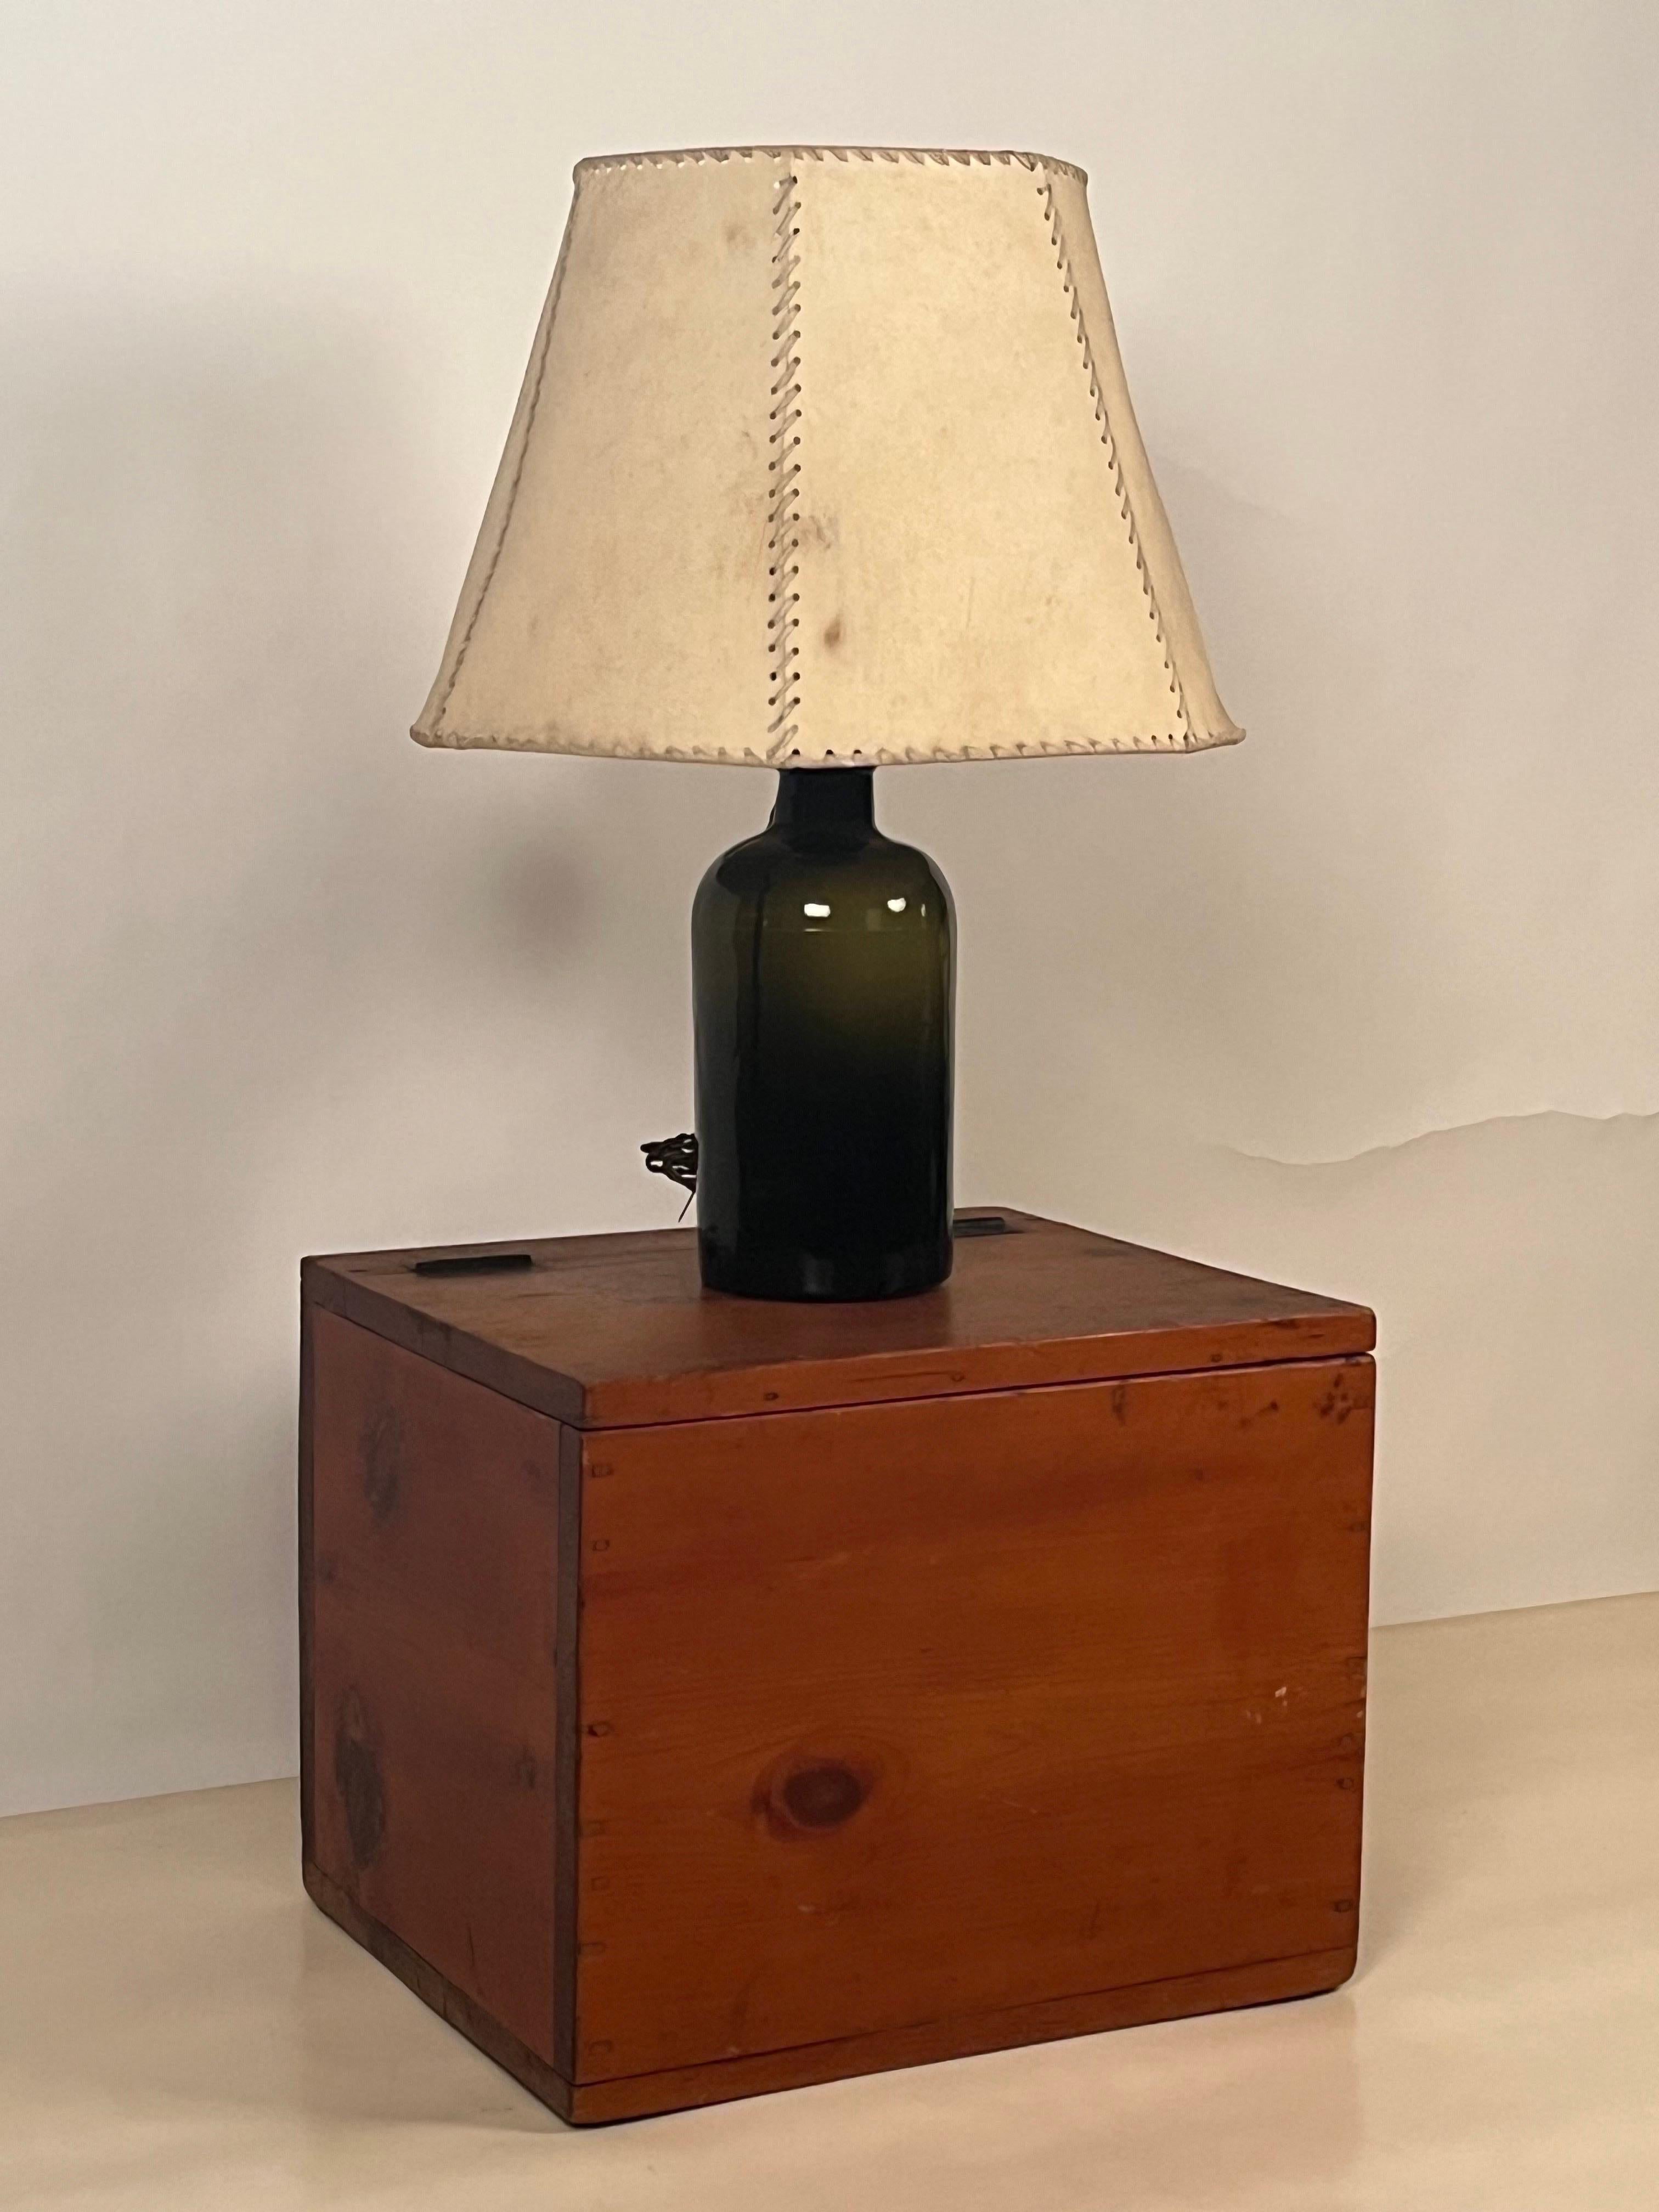 Olive glass bottle and parchment shade lamp with pine box in the style of Luis Barragan.

Lamp (overall dimensions with shade): 20 in. diameter x 27 in. tall
Box: 21 in. wide x 18 in. deep x 17 in. tall

Sold together.